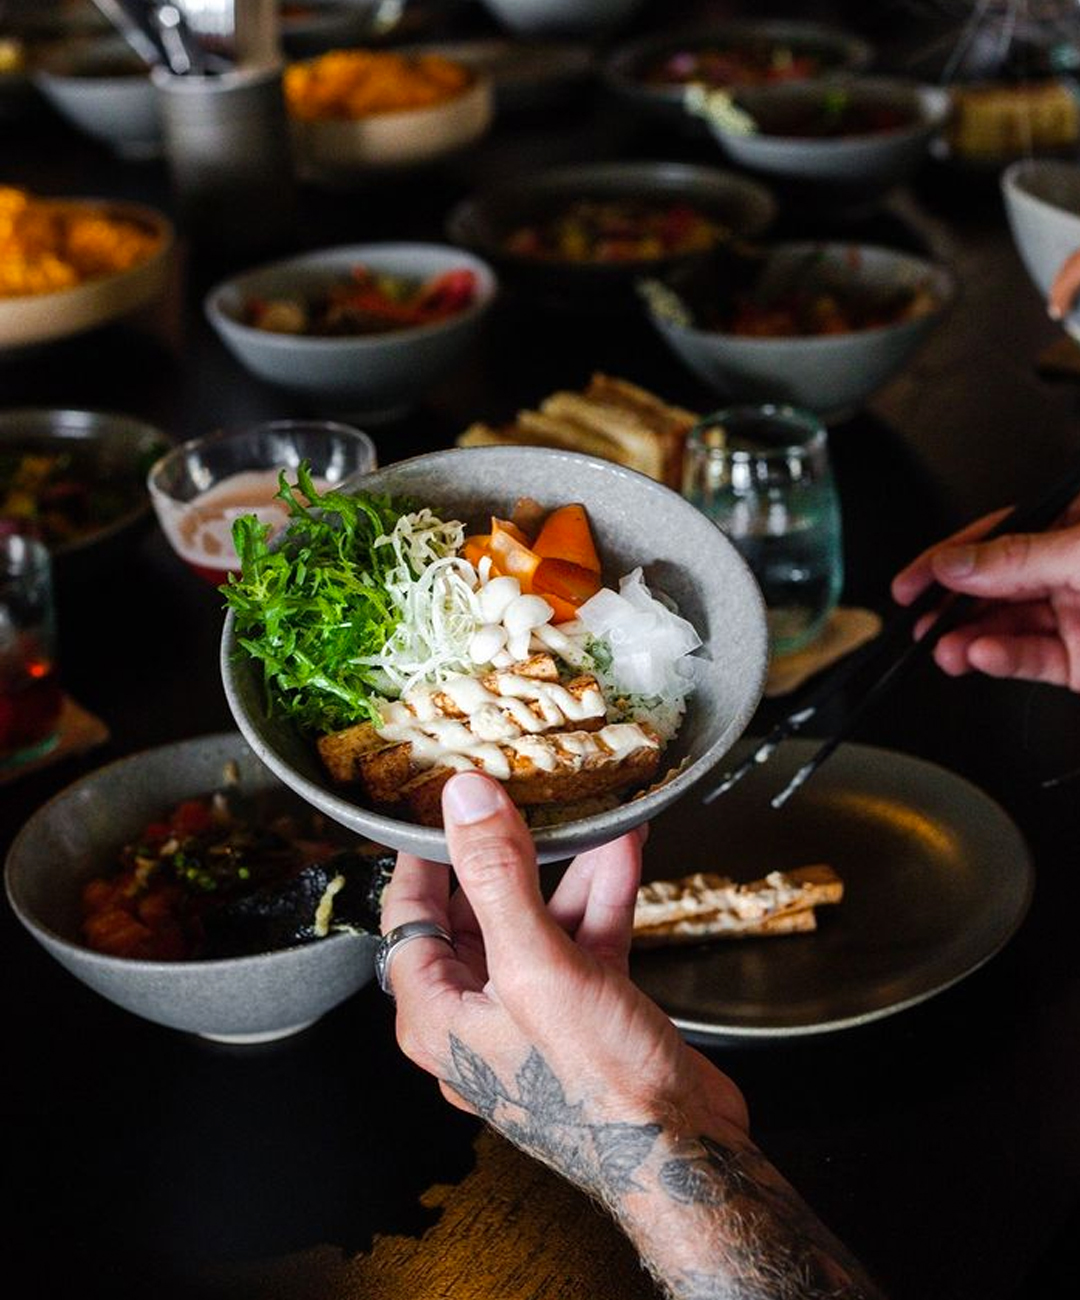 A tattooed hand holding up a bowl of vegetables and tofu